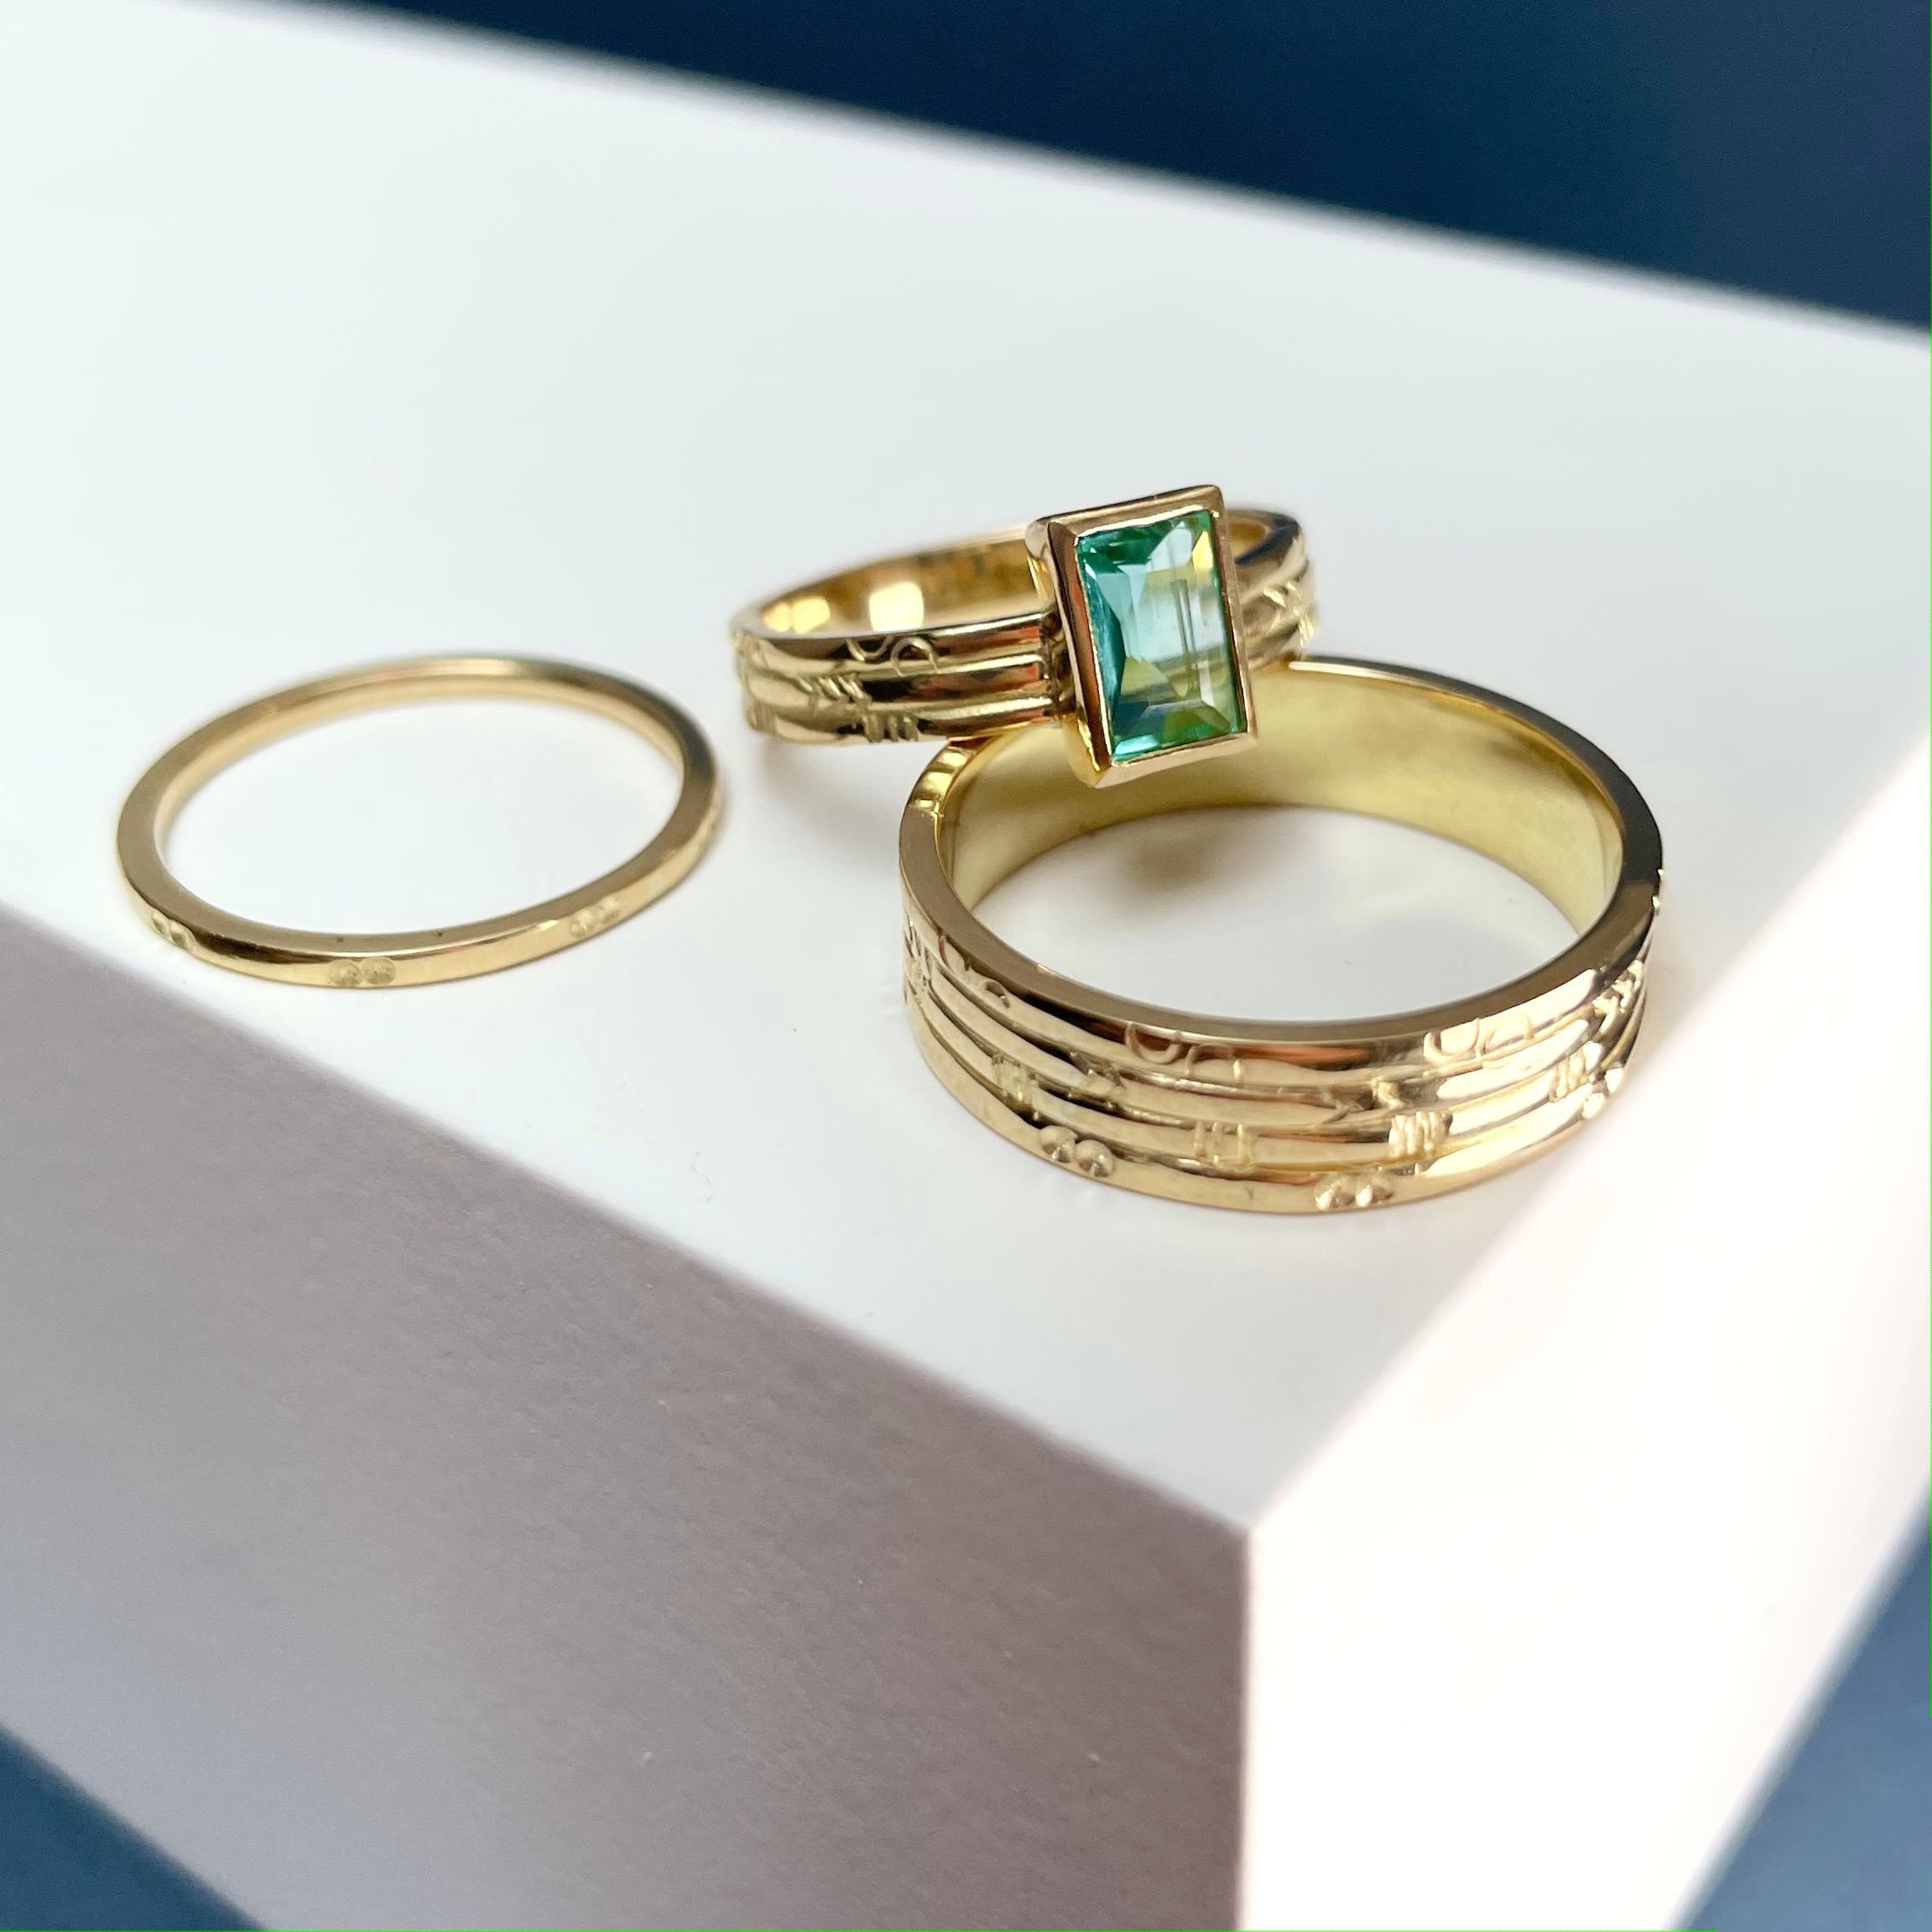  Three rings, two gold wedding bands with subtle graphic detailing in different widths and a gold engagement ring which compliments the wedding bands and in addition has a rectangular green stone set on top. 